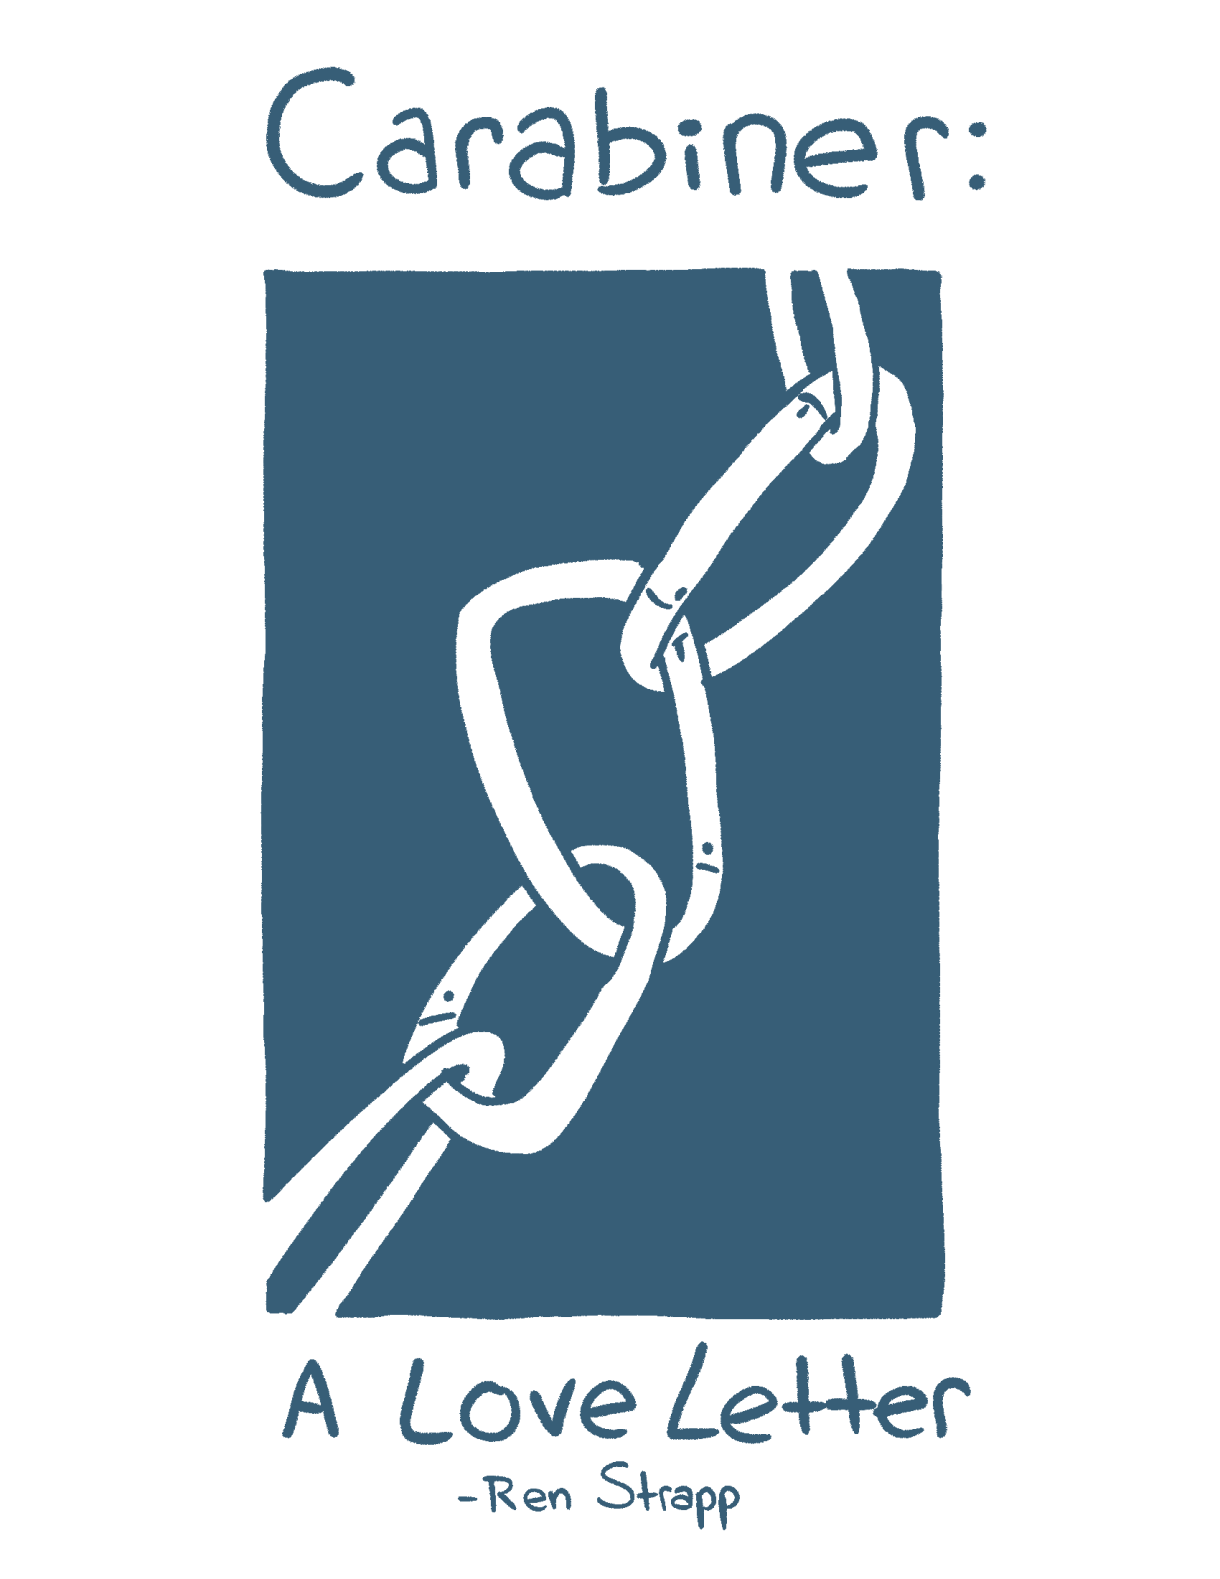 Carabiner: A Love Letter by Rea Strapp, in blue a box of carabiners linked together in a chain